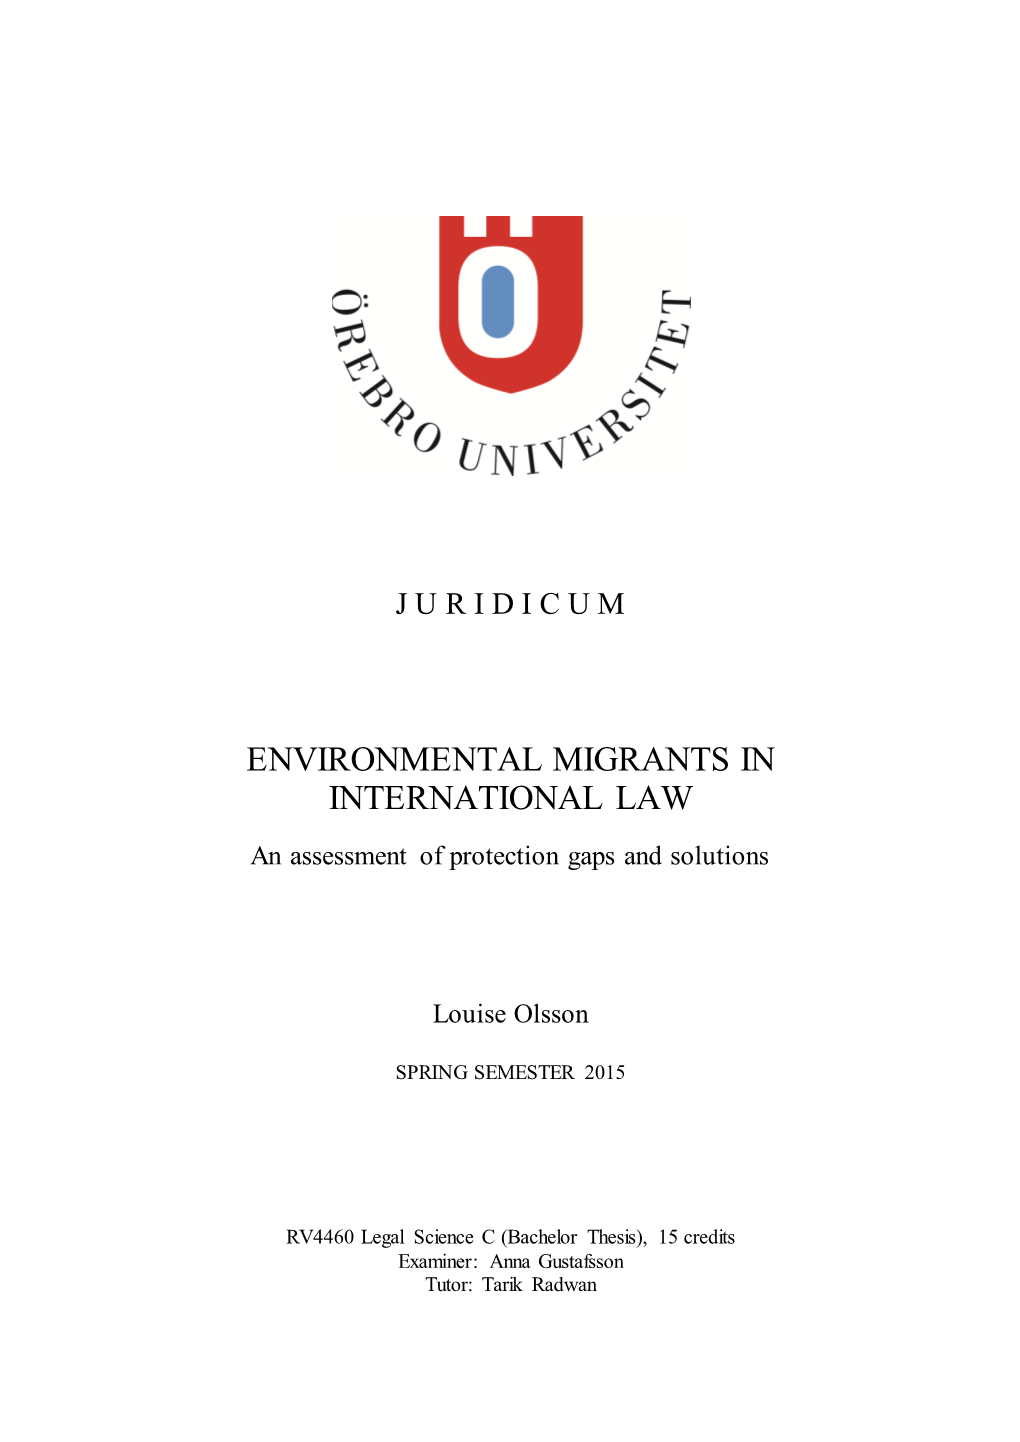 ENVIRONMENTAL MIGRANTS in INTERNATIONAL LAW an Assessment of Protection Gaps and Solutions